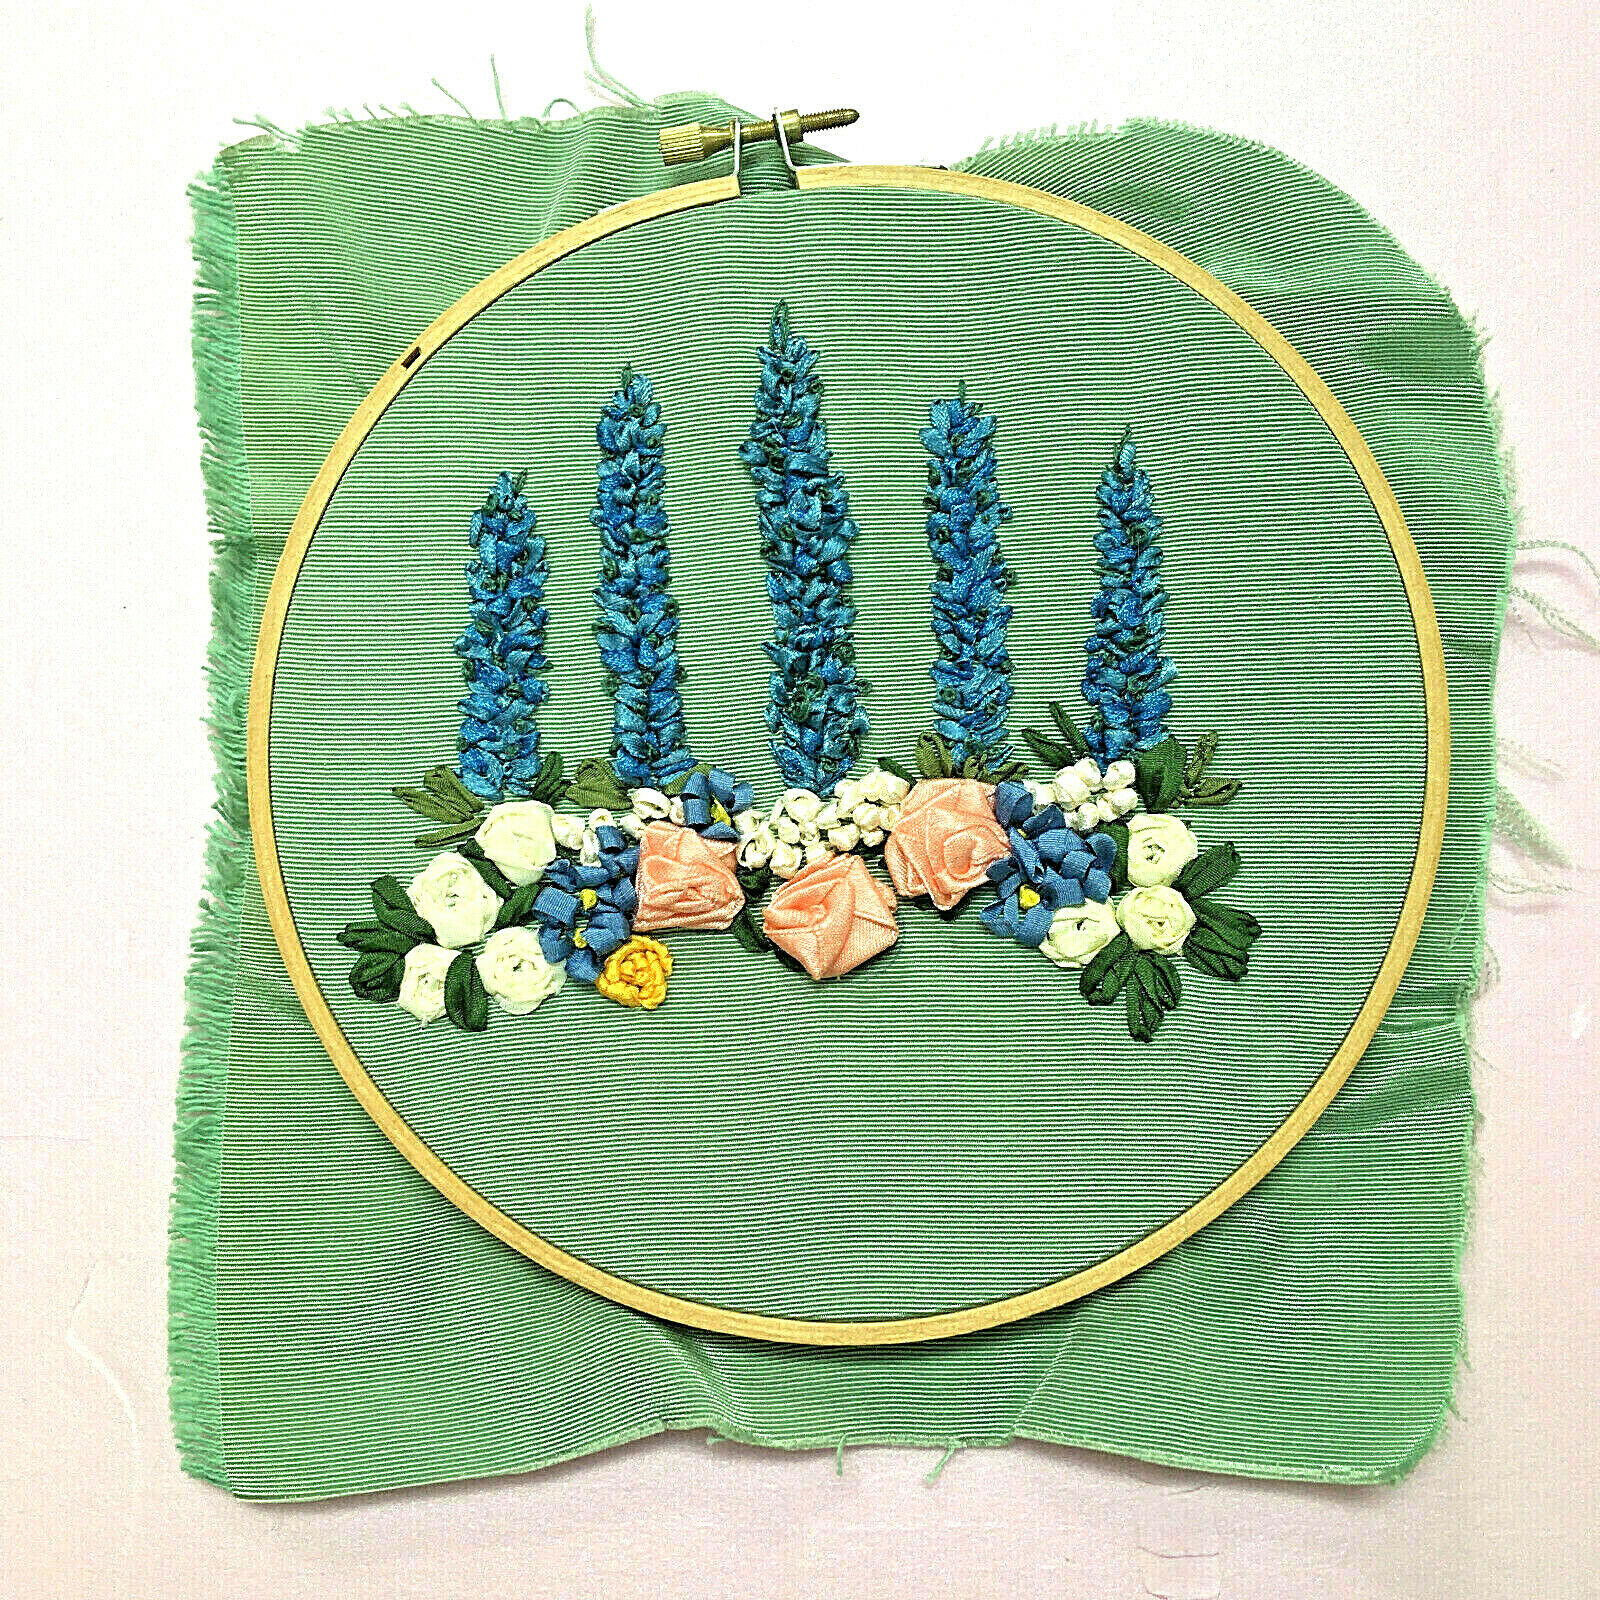 Finished Ribbon Embroidery Flowers In Hoop, 7" Green Faille, Old-fashioned Charm